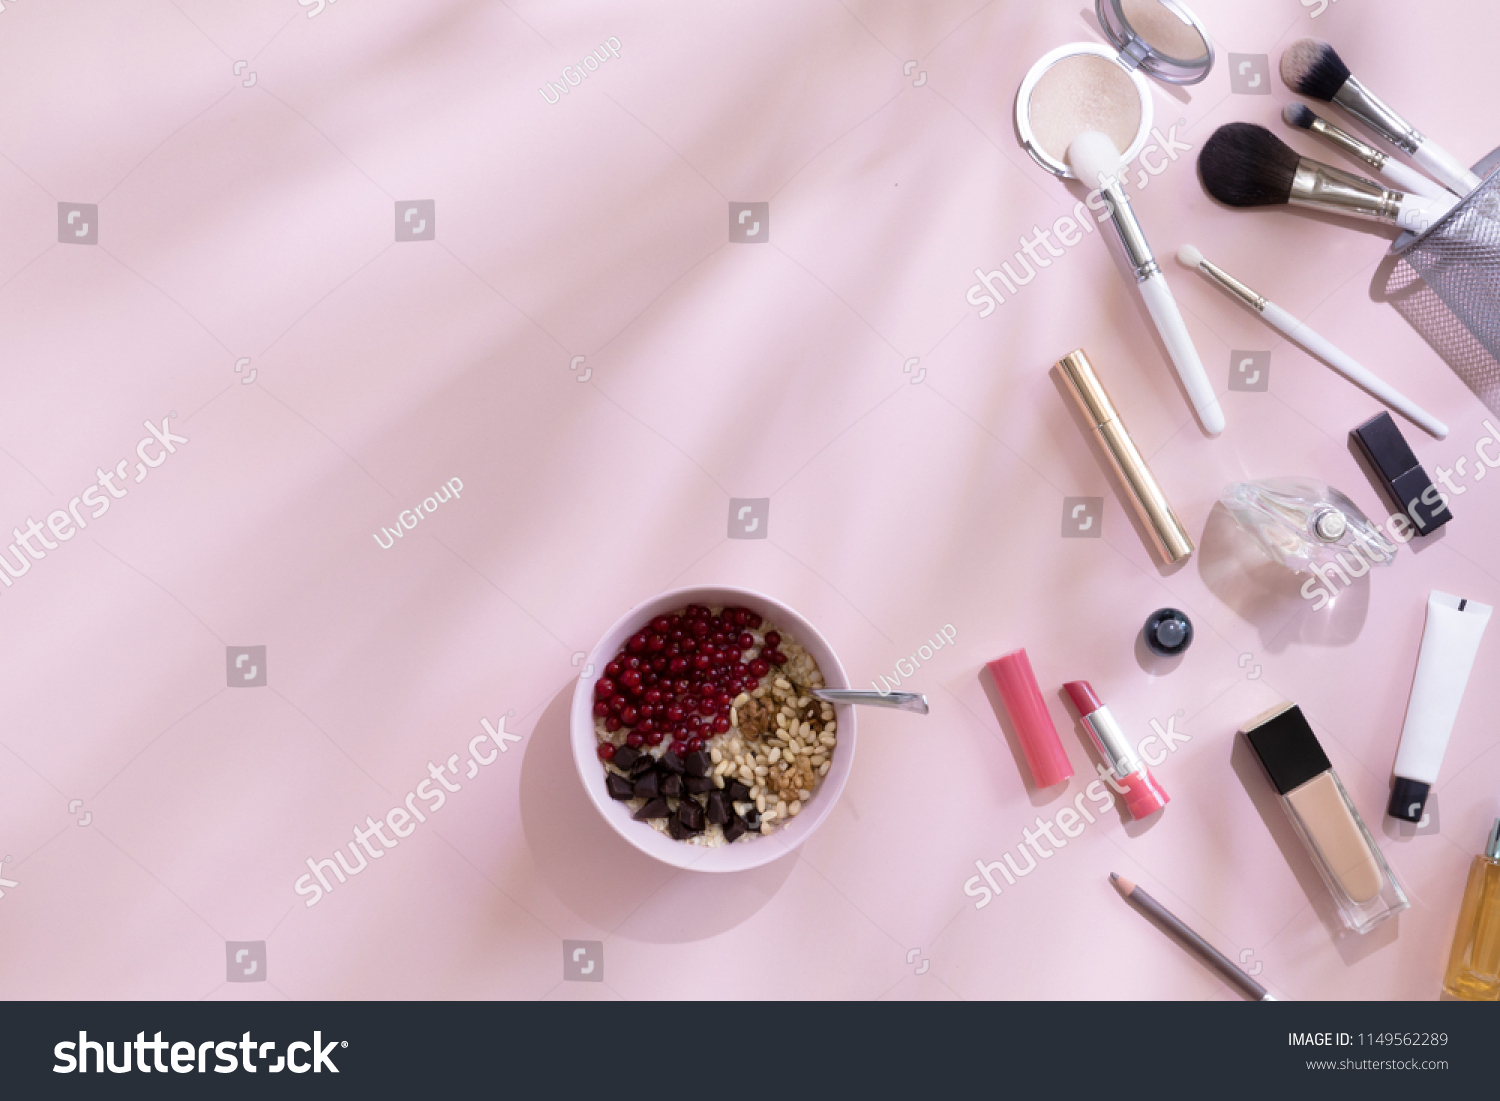 Top view of elegant woman make up table with pink and white accents and shadows on background, female morning with healthy breakfast oat flakes with berries, flat lay and copy space #1149562289